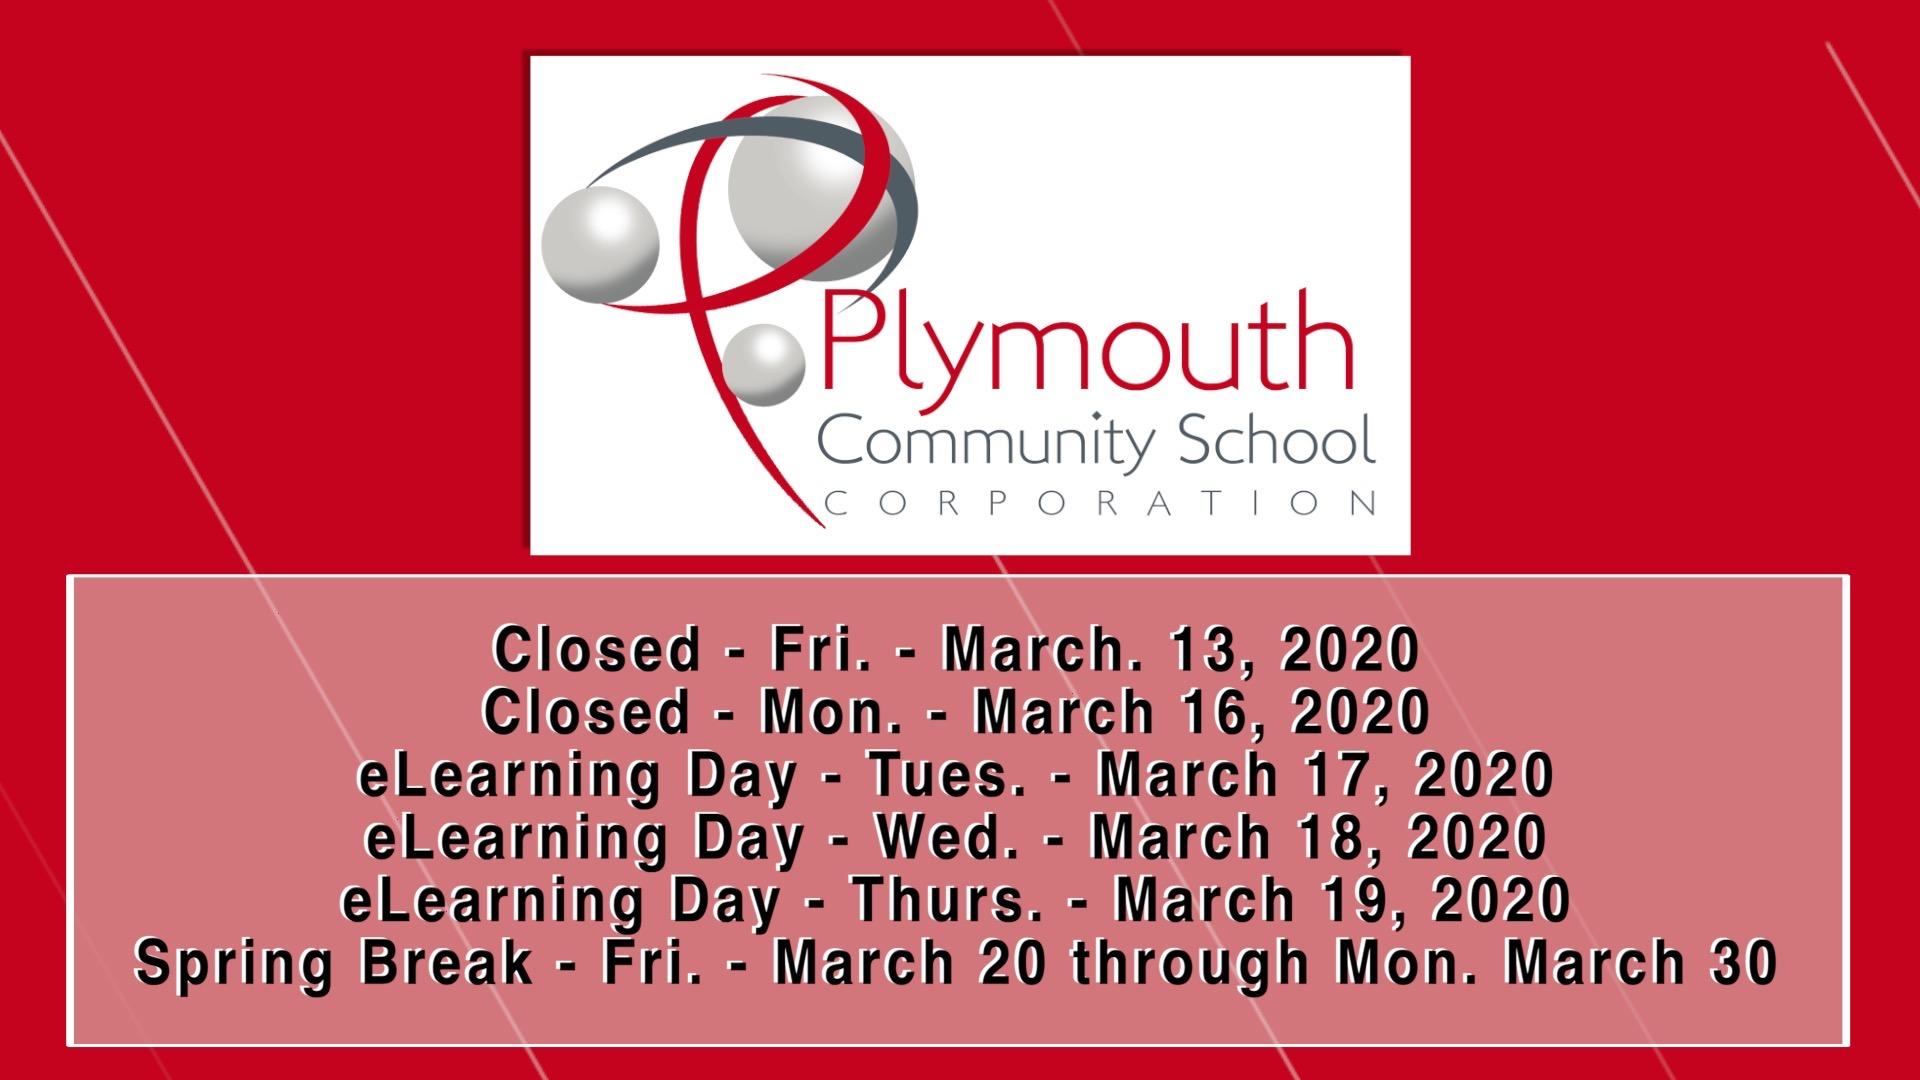 Closed-PCSC logo-Friday, March 13, 2020 and Monday, March 16, 2020-eLearning days Tuesday, March 17, Wednesday, March 18, Thursday, March 19, Spring Break Friday, March 20 through Monday, March 30